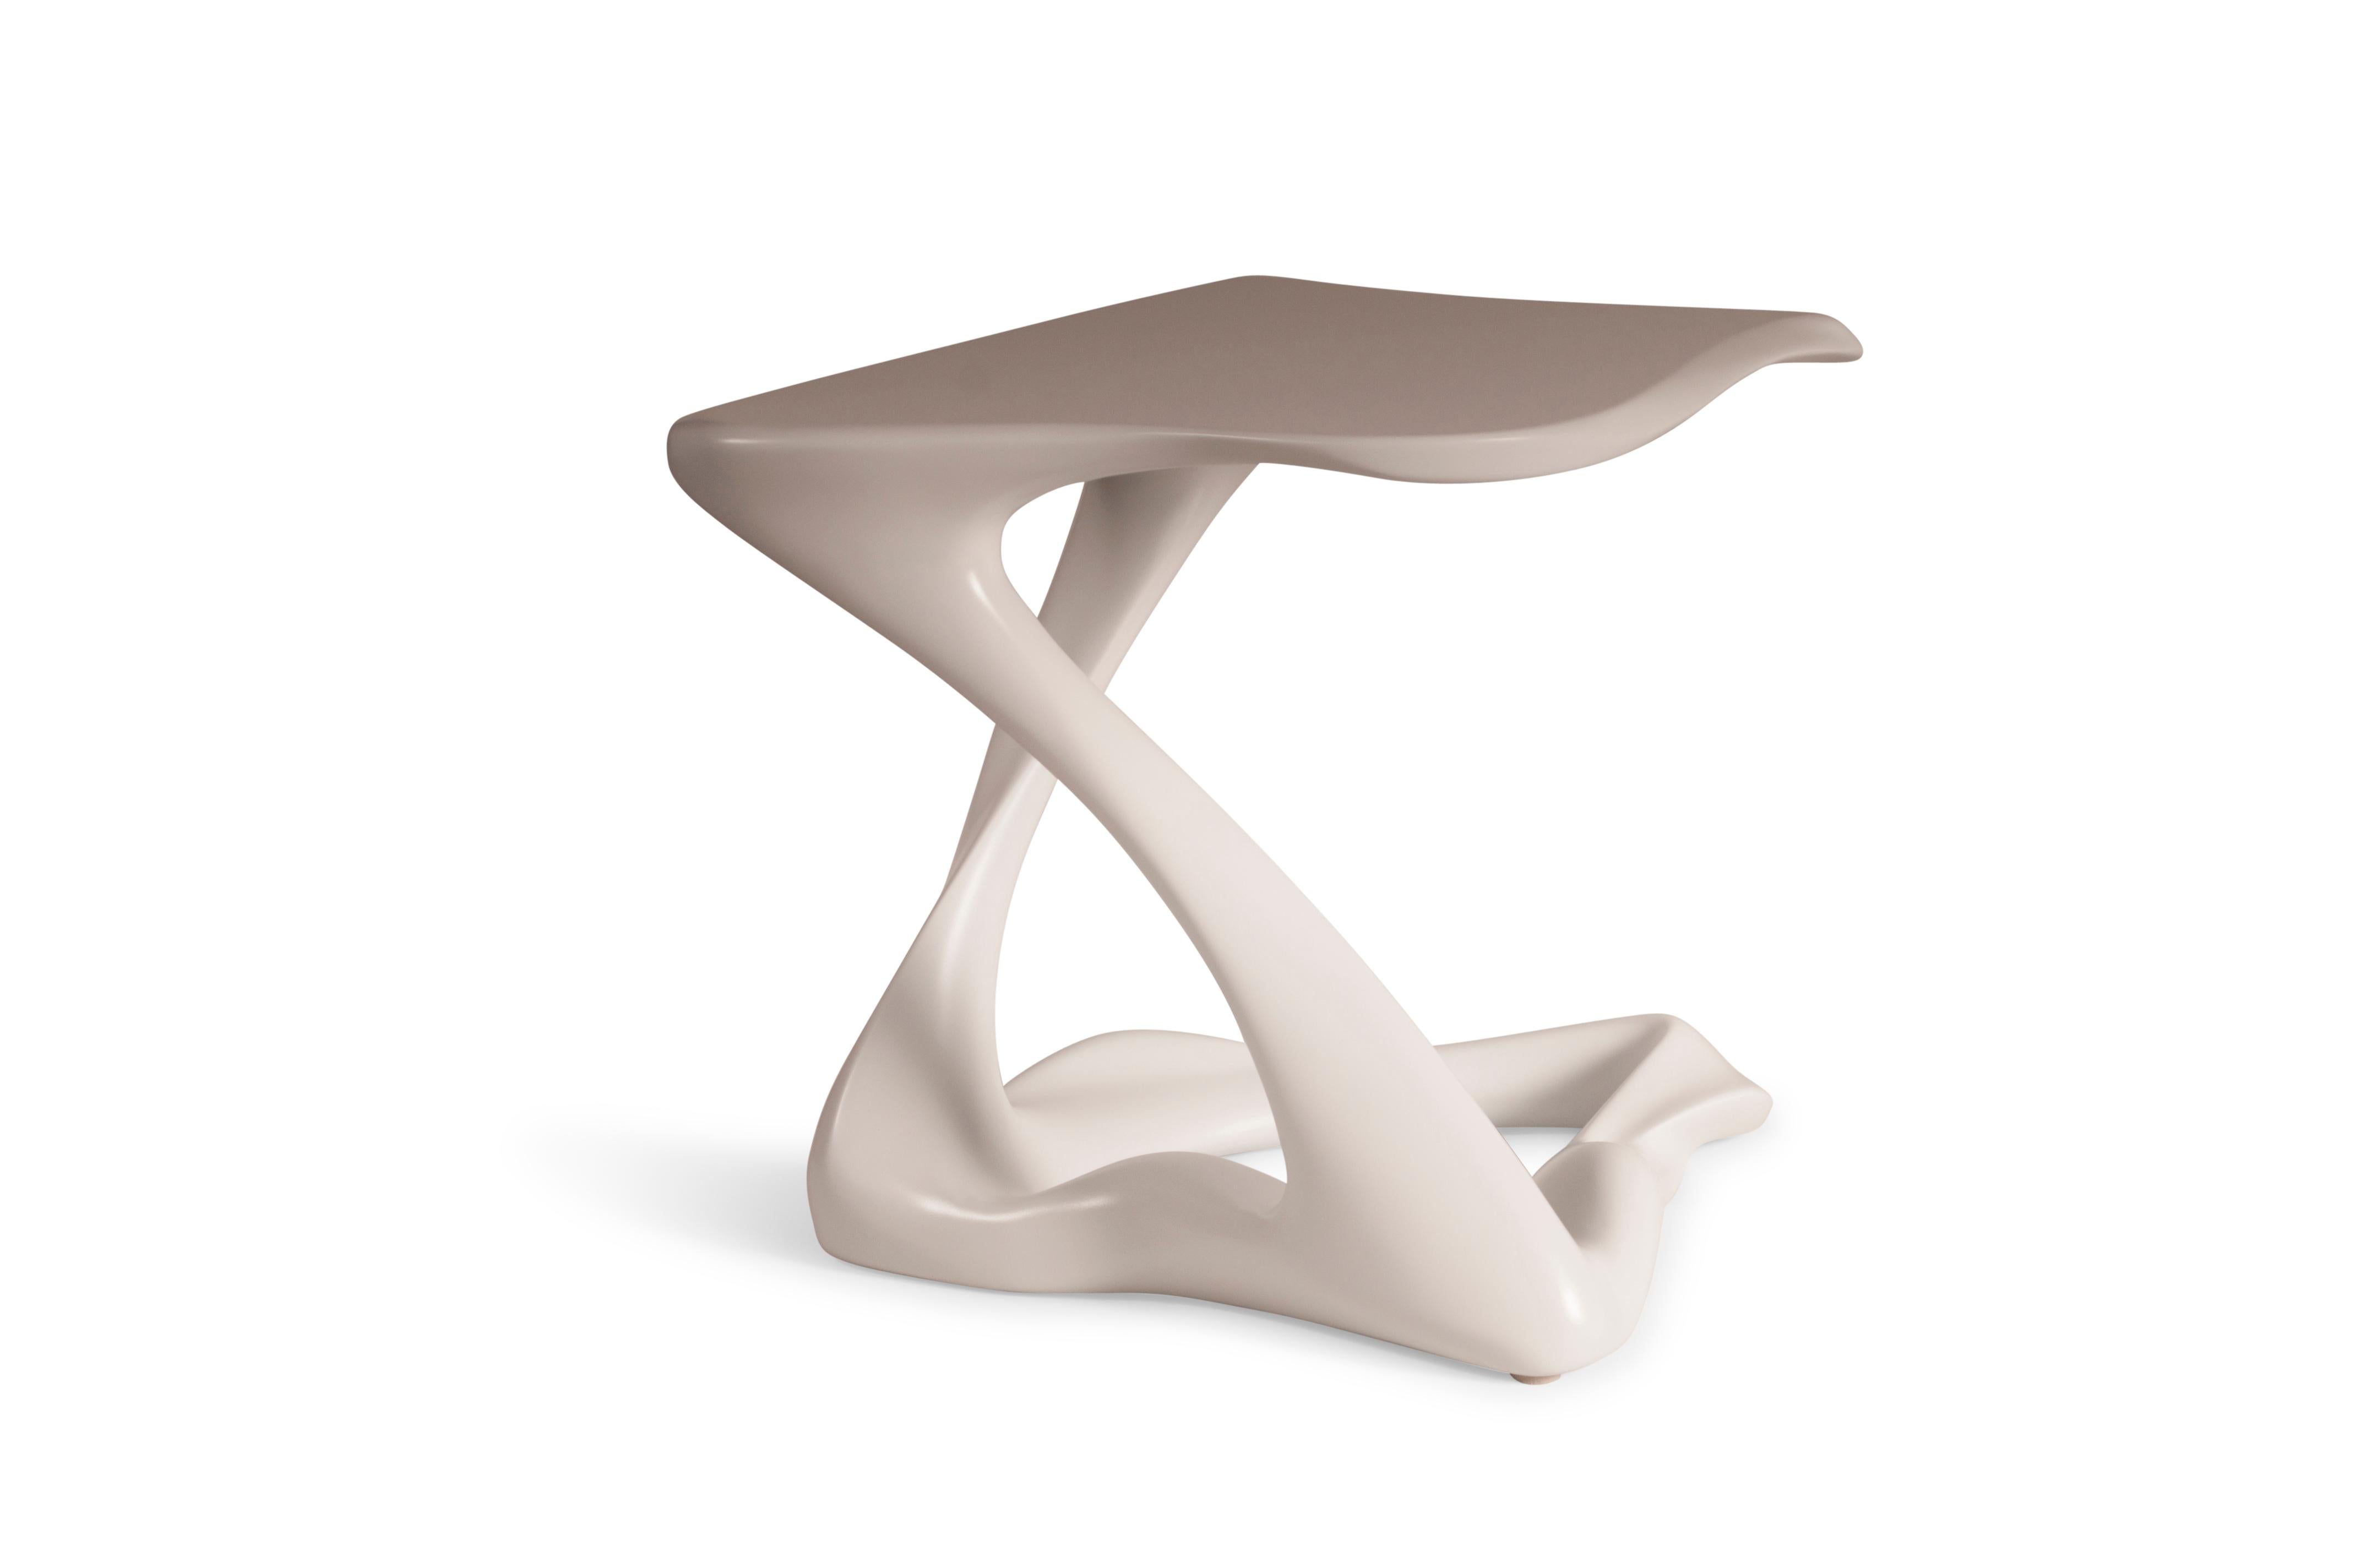 Side table (Tryst) is a stylish futuristic sculptural art table with a dynamic. Tryst is made out of solid ash wood with dark walnut stain. By the nature, the ash wood grain’s look would be slightly different from the other.

It is available in